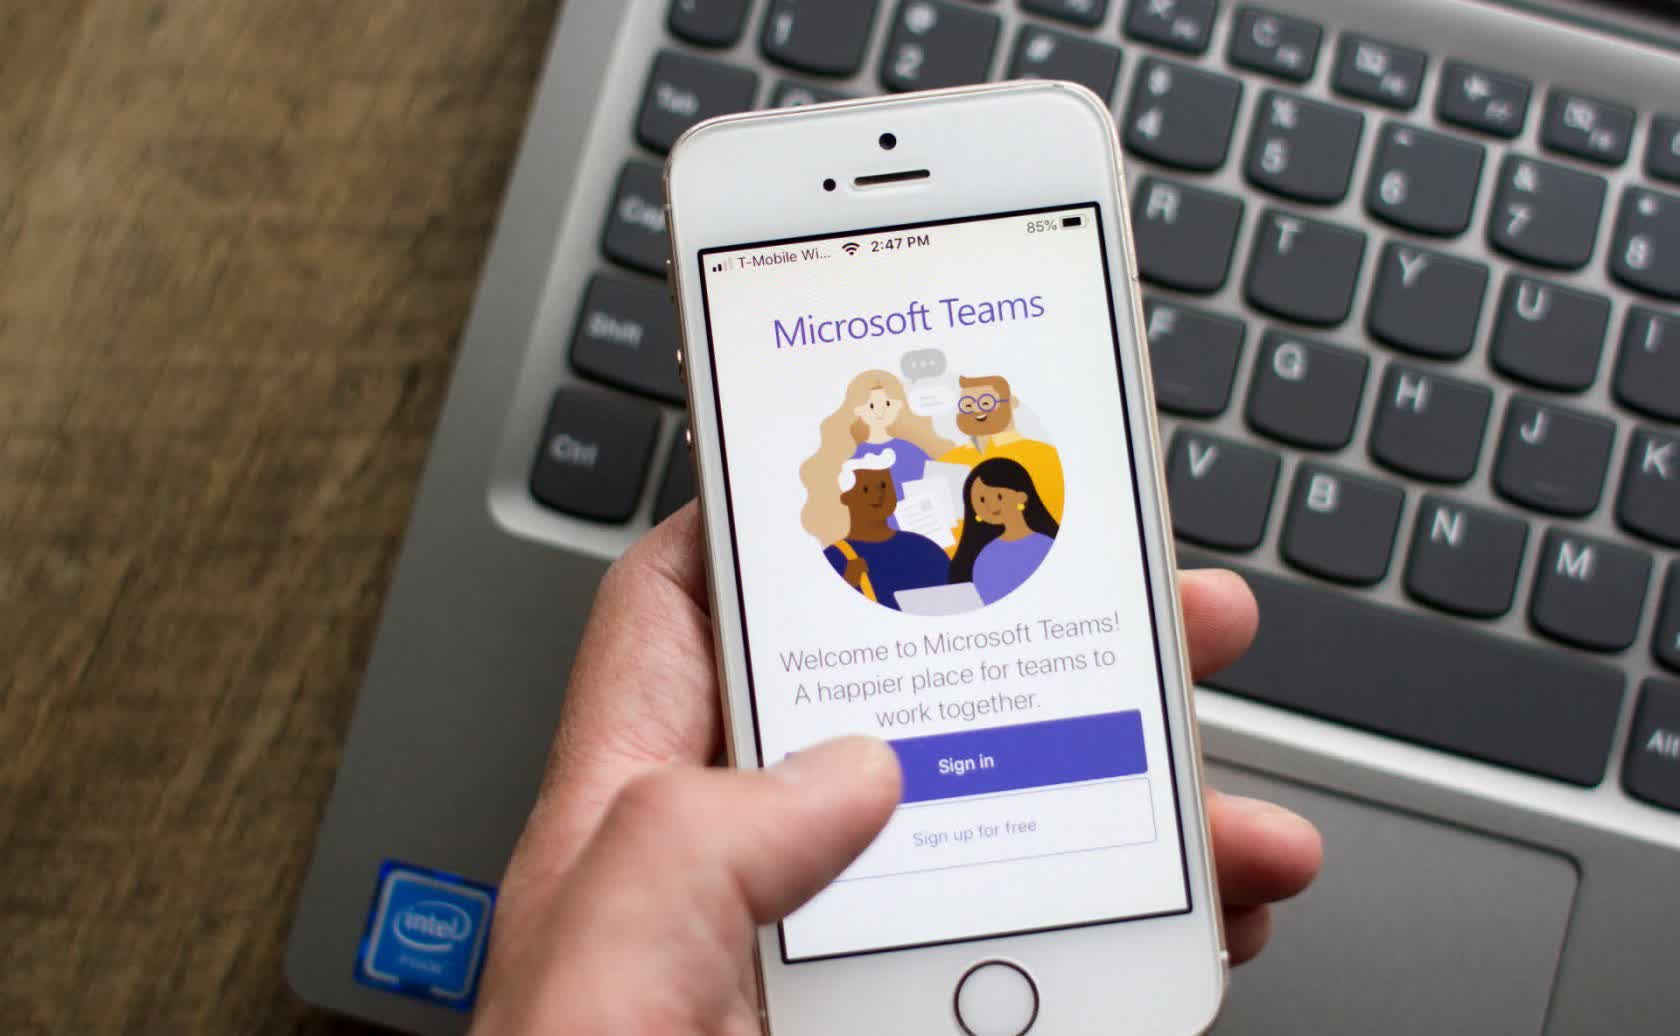 Microsoft Teams skyrockets in popularity, reaching 115 million daily active users